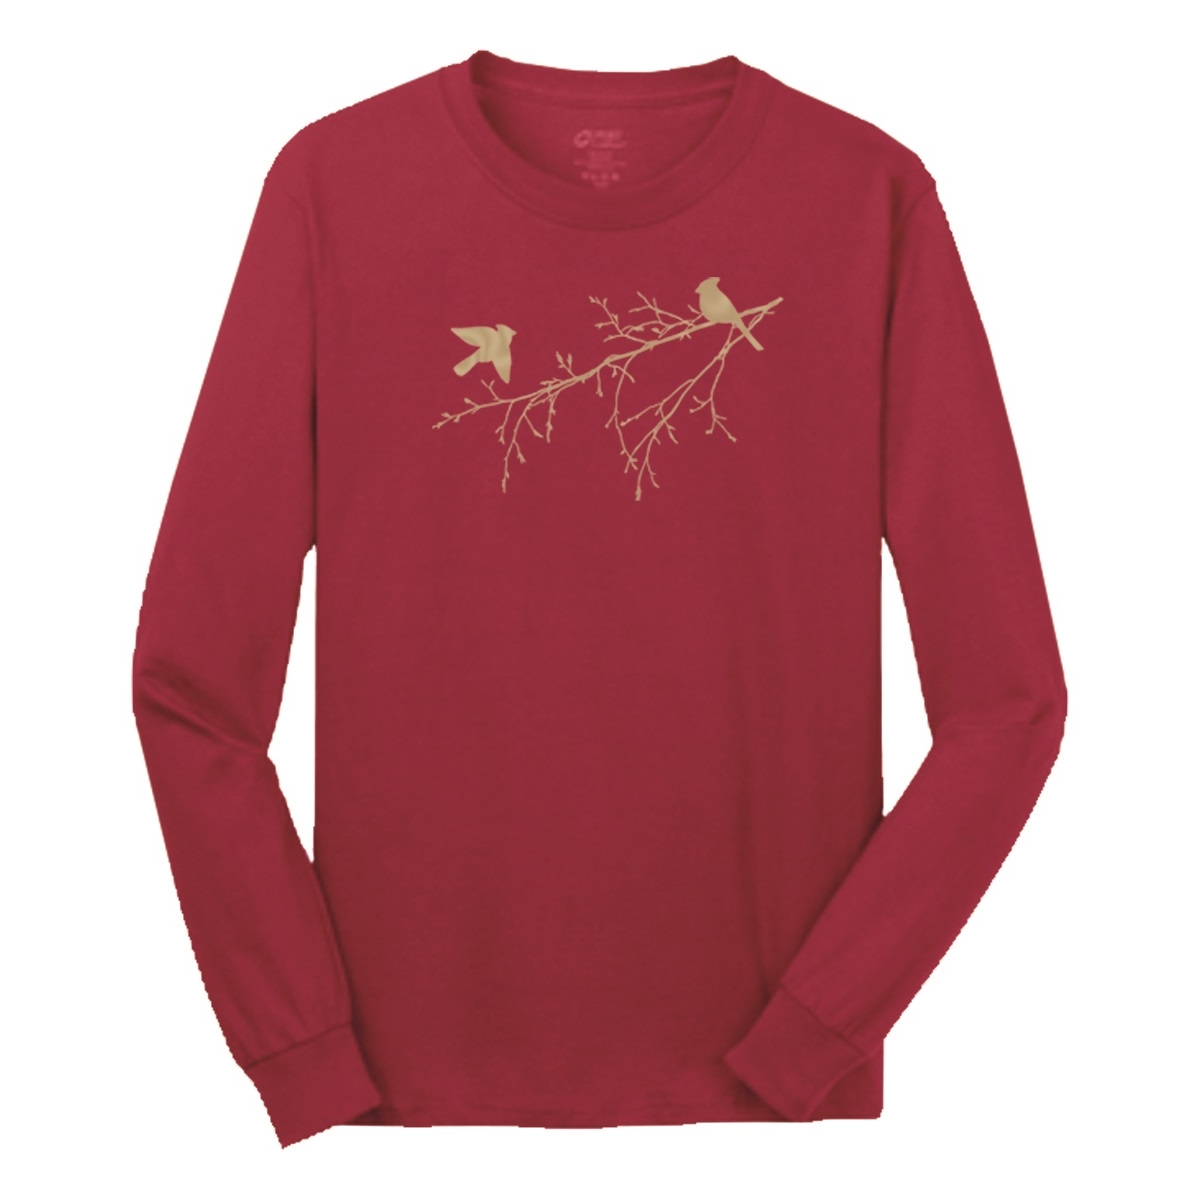 Cardinals and Branches Long Sleeve Tee